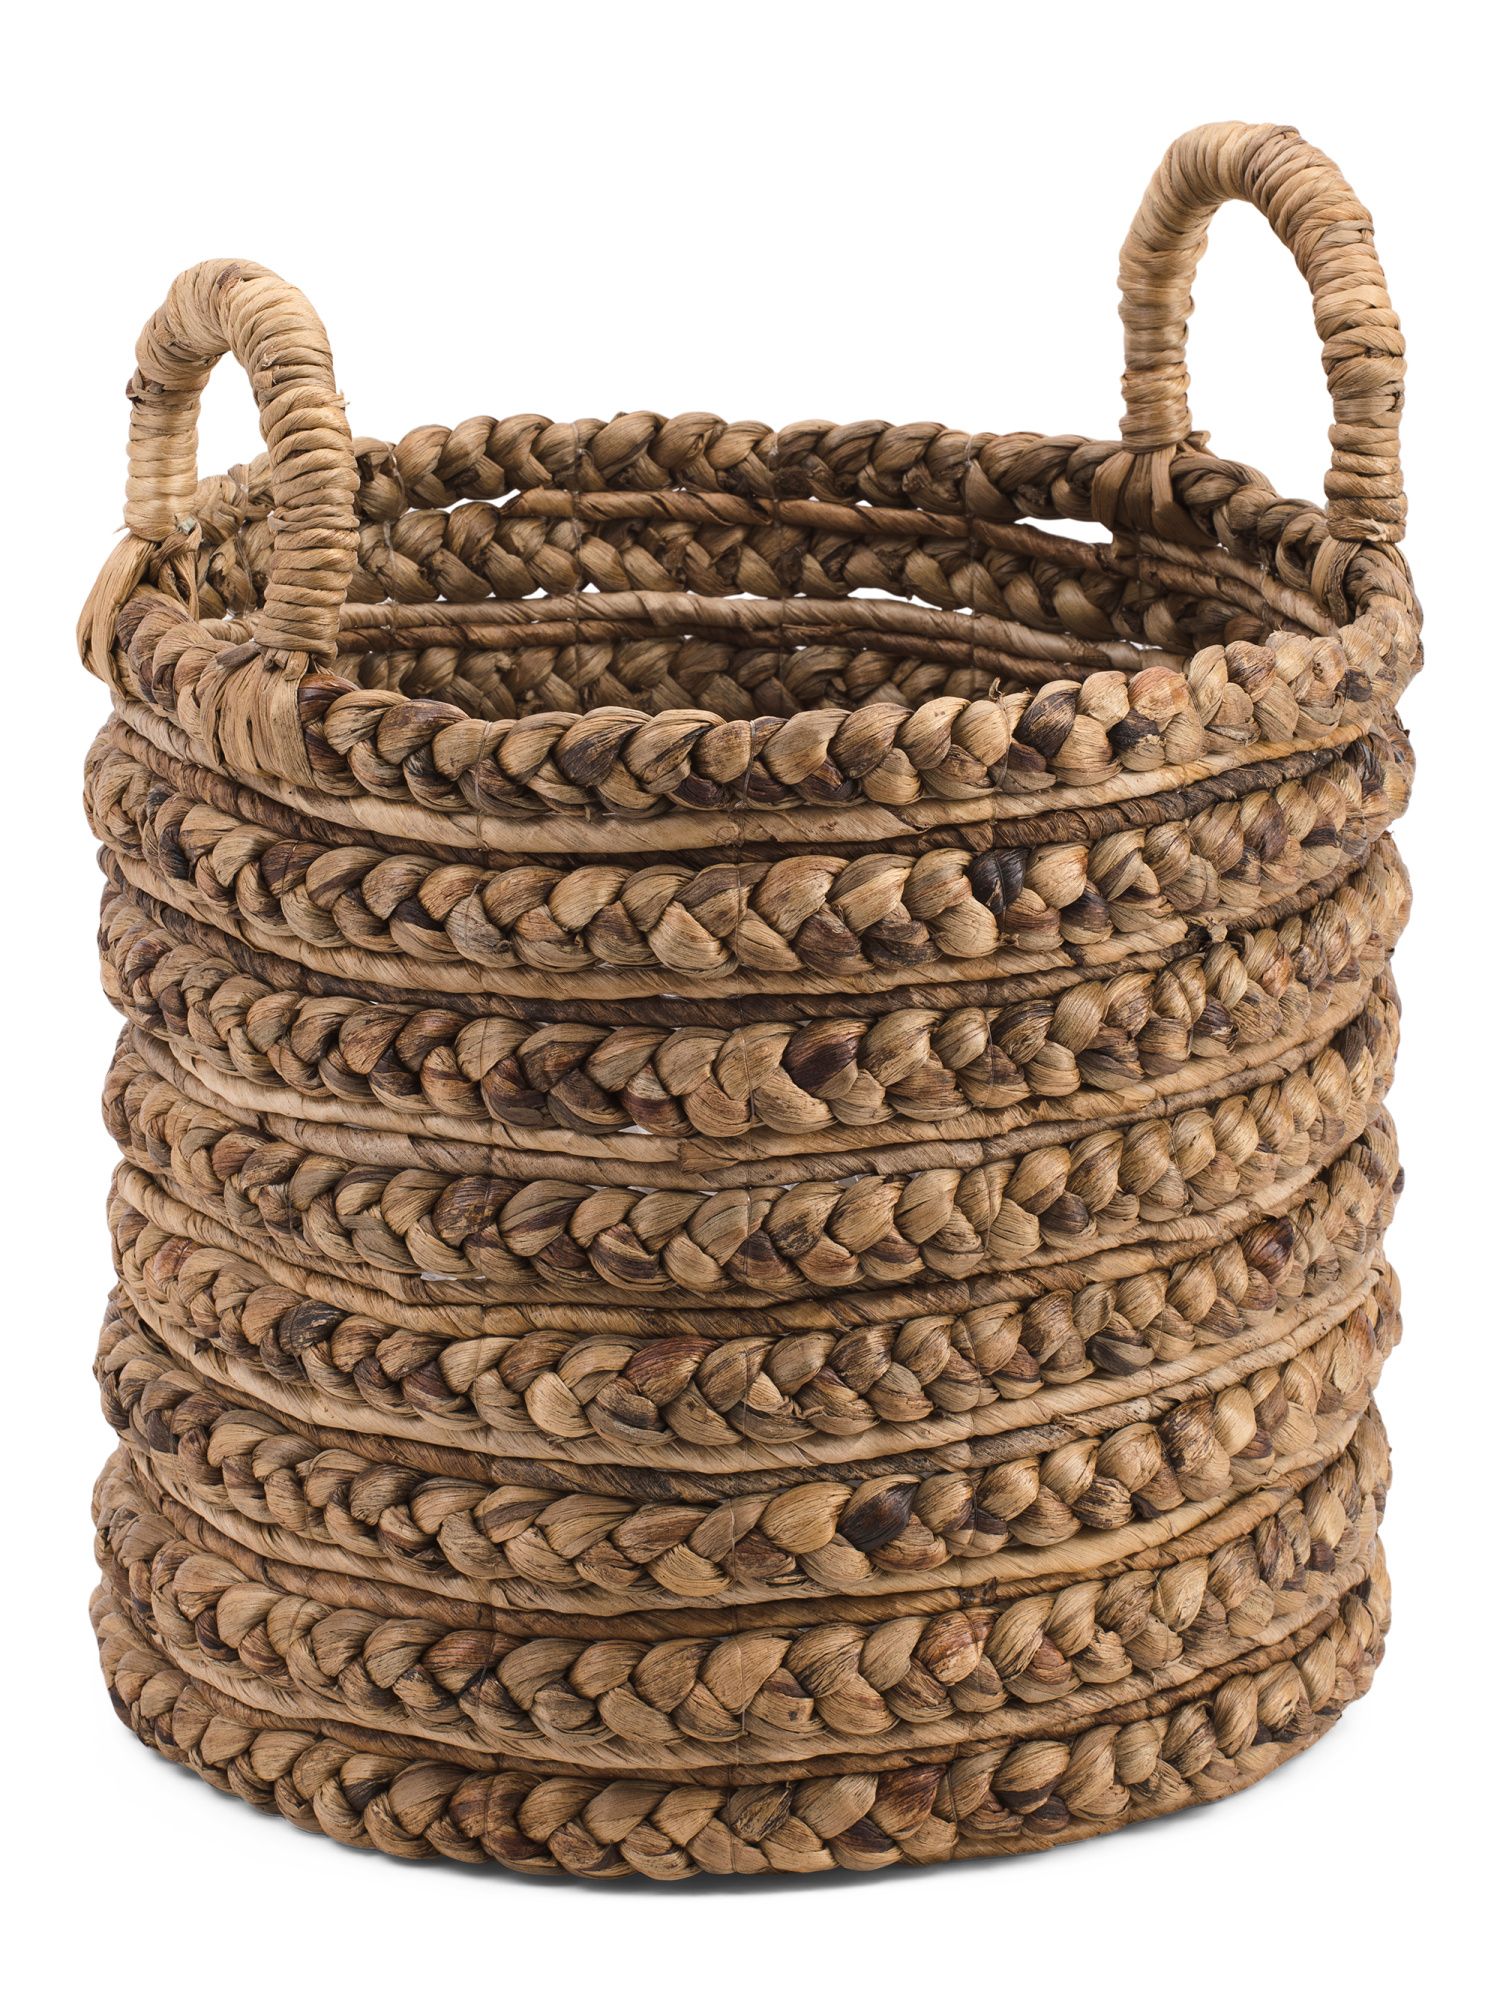 Braided Water Basket Collection | TJ Maxx